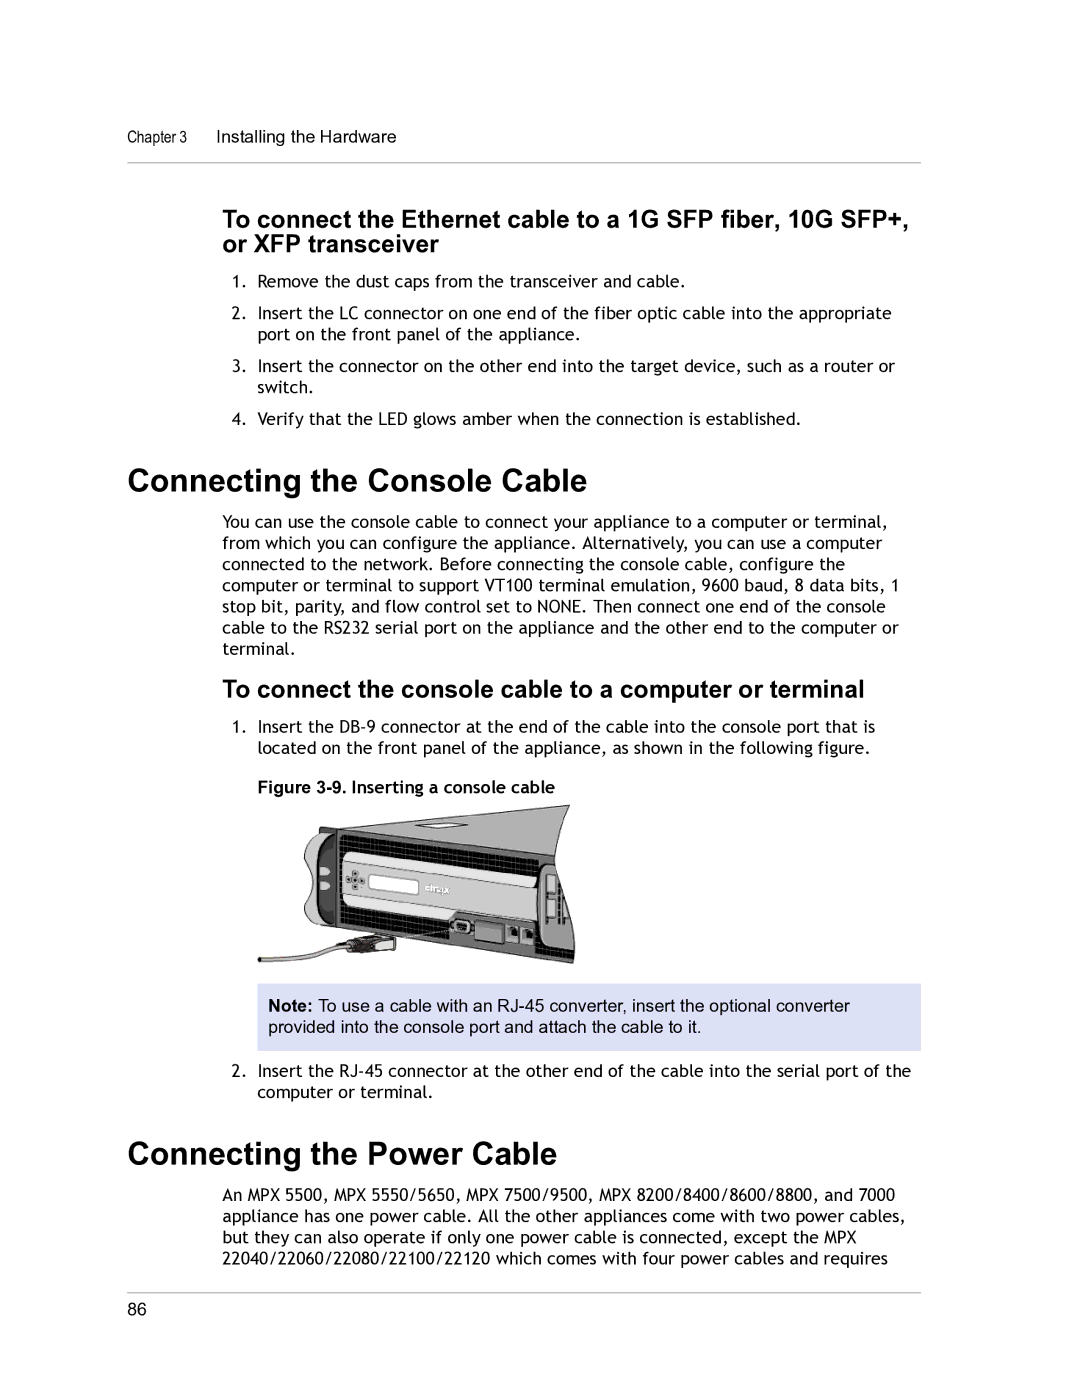 Citrix Systems 9.3 setup guide Connecting the Console Cable, Connecting the Power Cable 